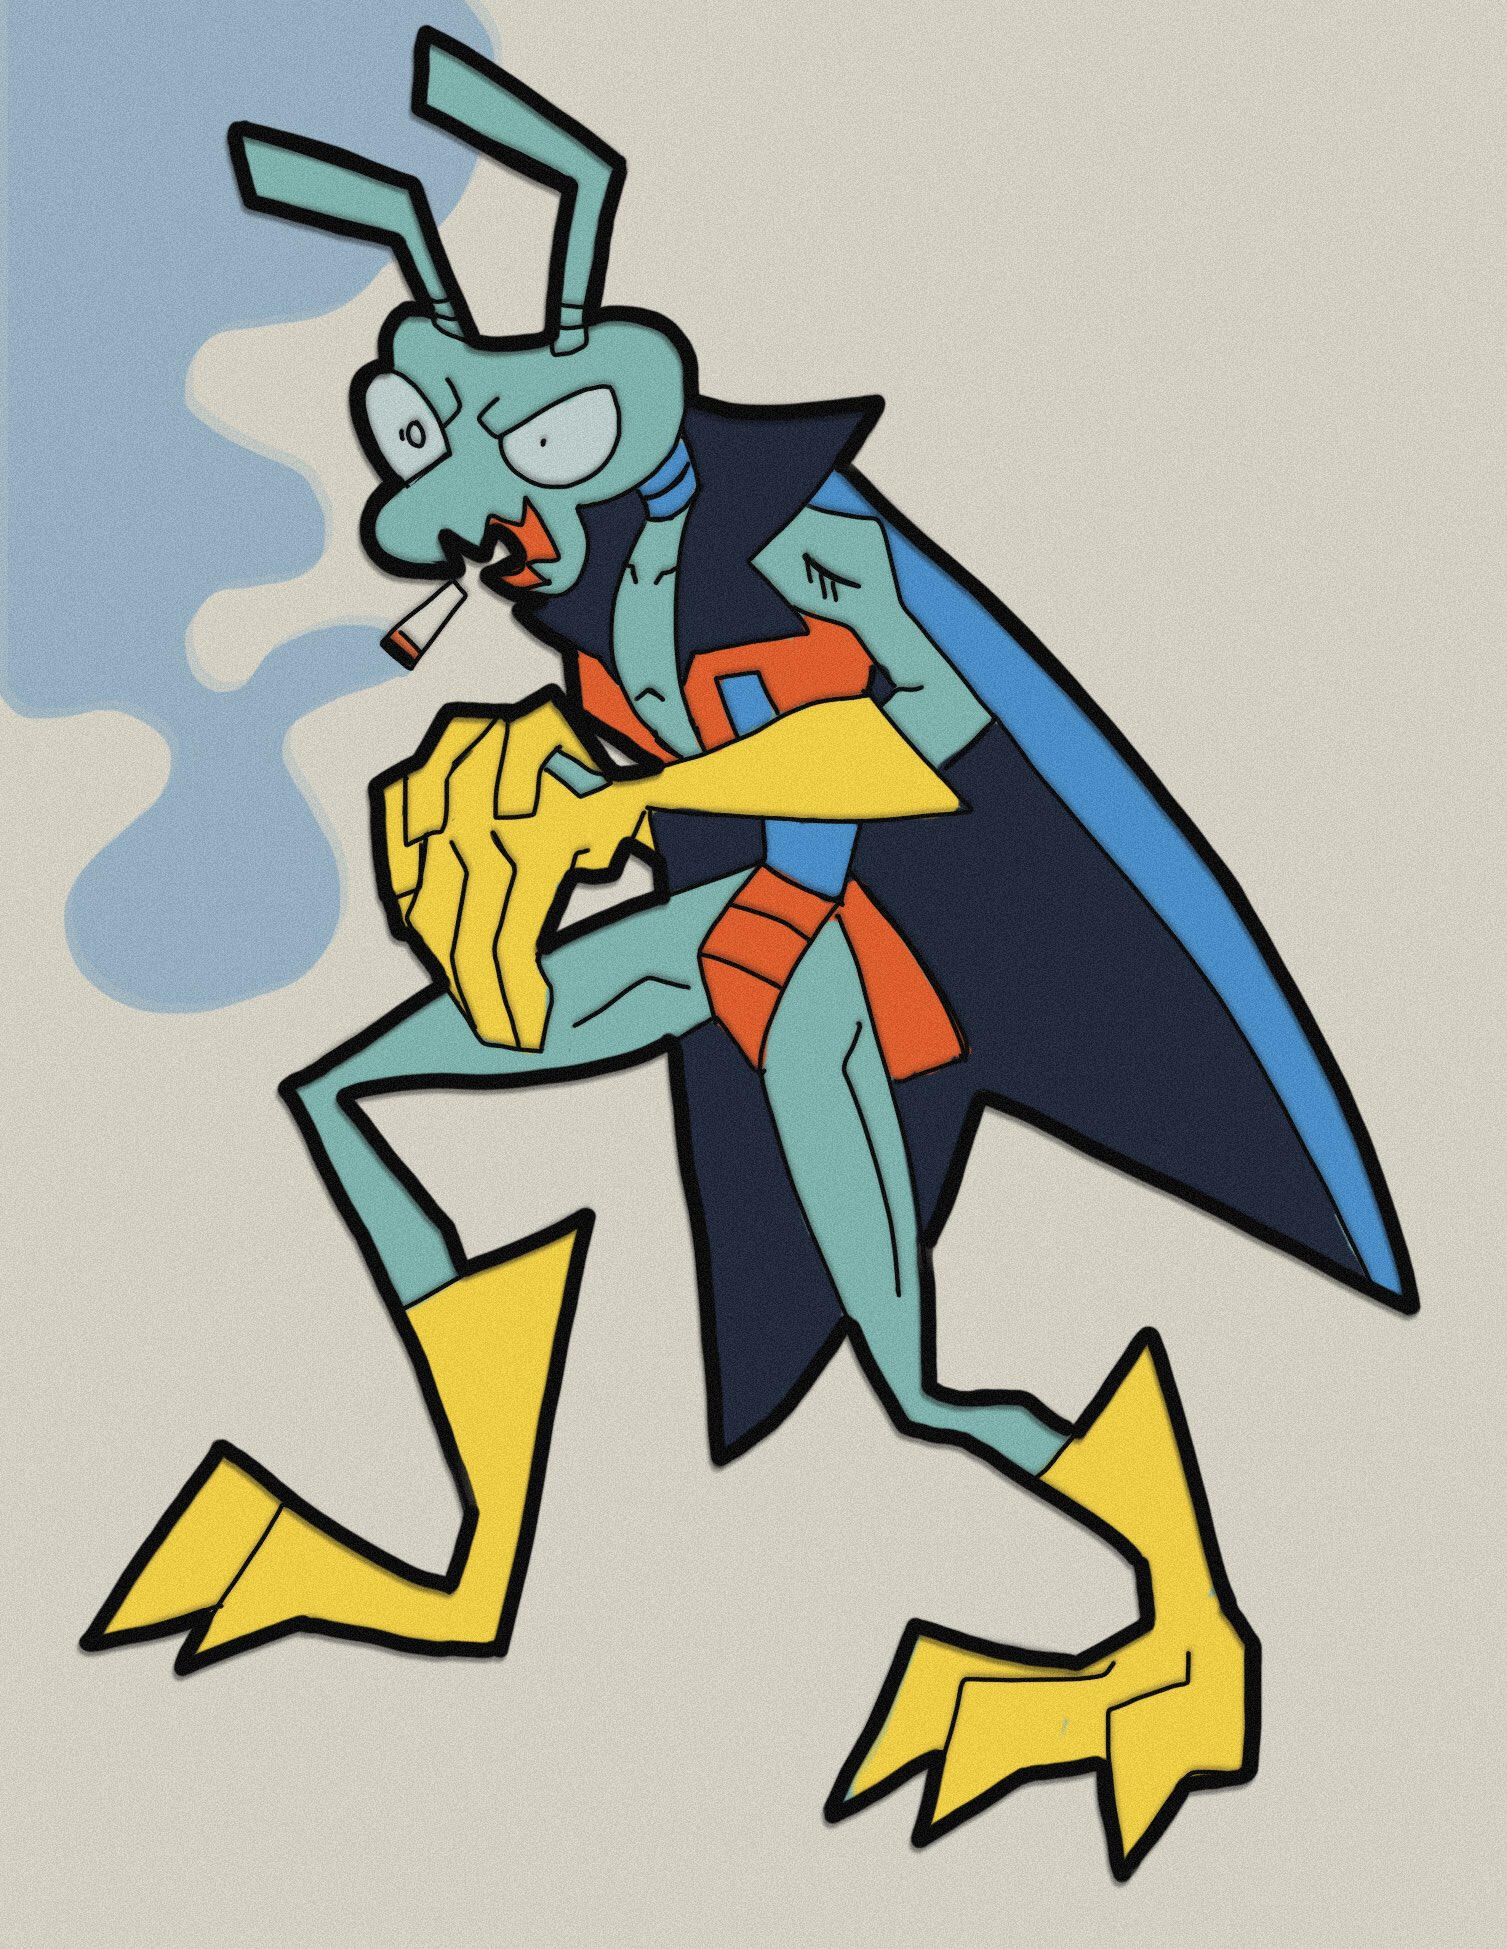 A quick redesign of zorak from space ghost. I wanted to add a bit more Clay Martin Croker's personality to his design- he's one of my personal heroes! Done in 2022.